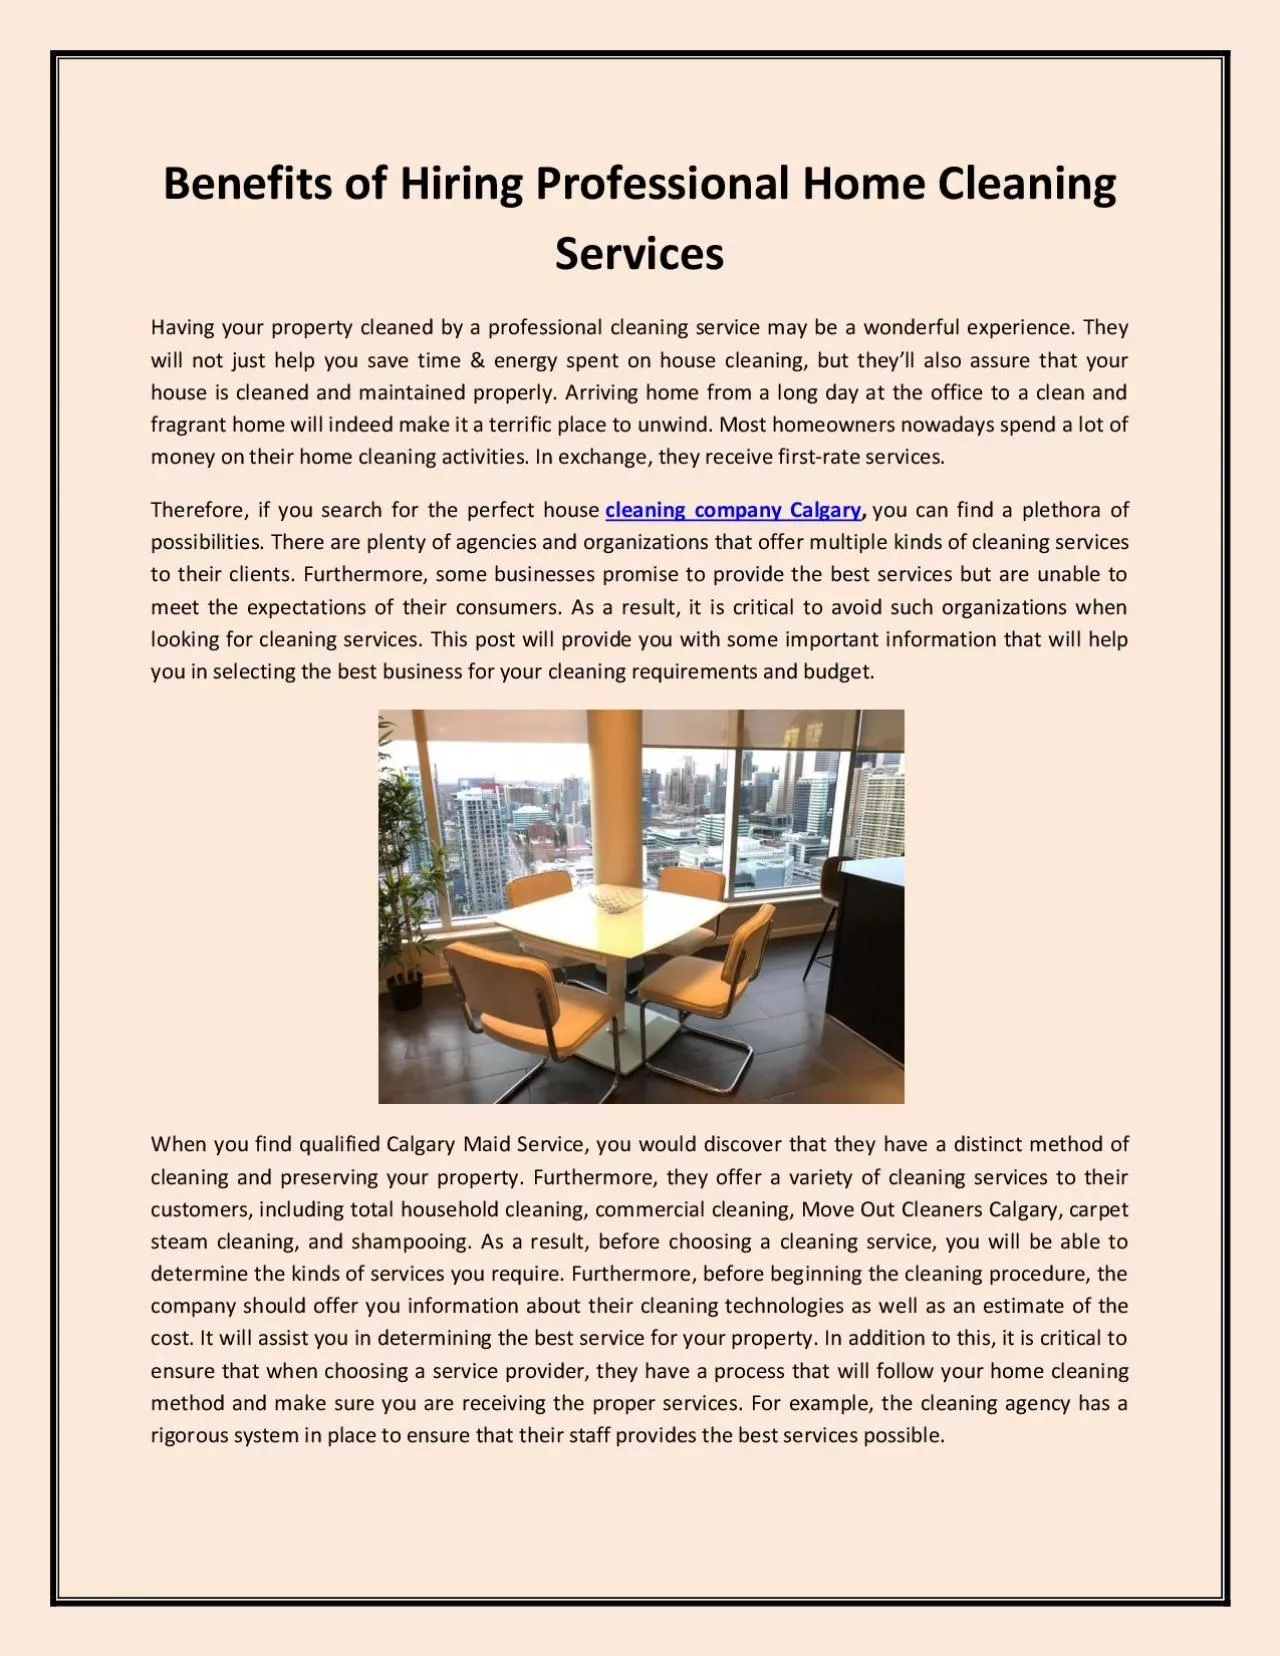 Benefits of Hiring Professional Home Cleaning Services